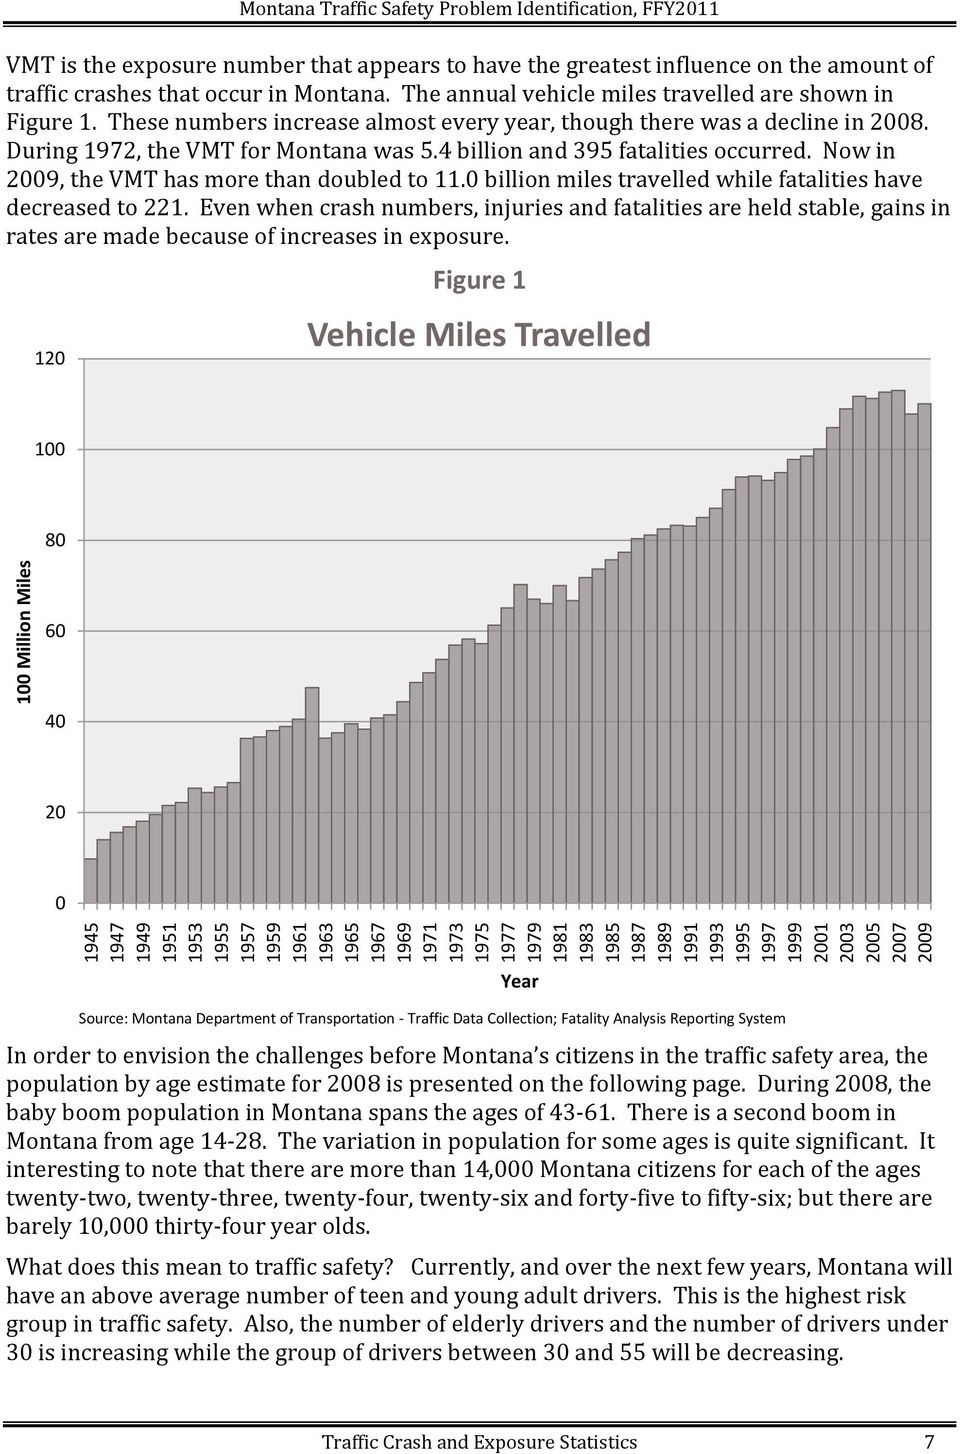 The annual vehicle miles travelled are shown in Figure 1. These numbers increase almost every year, though there was a decline in 2008. During 1972, the VMT for Montana was 5.